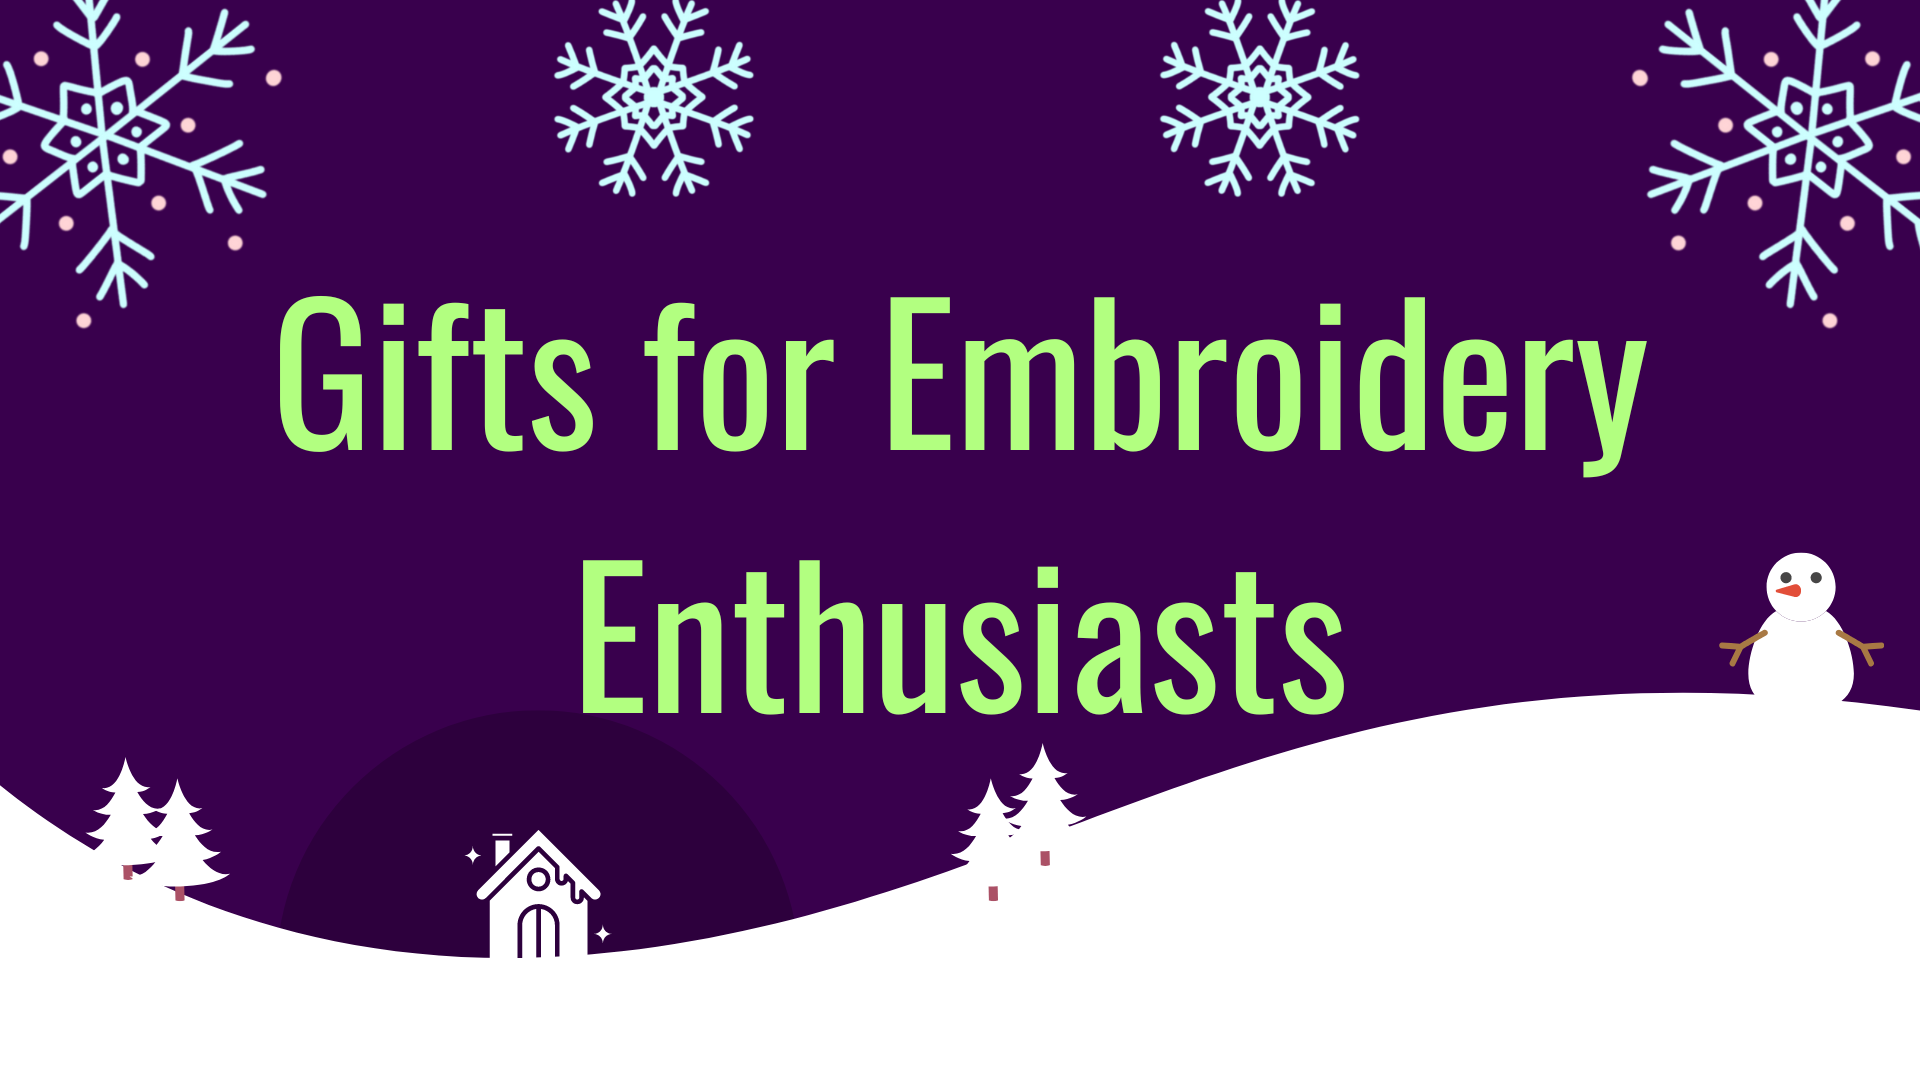 Gifts for Embroidery Enthusiasts